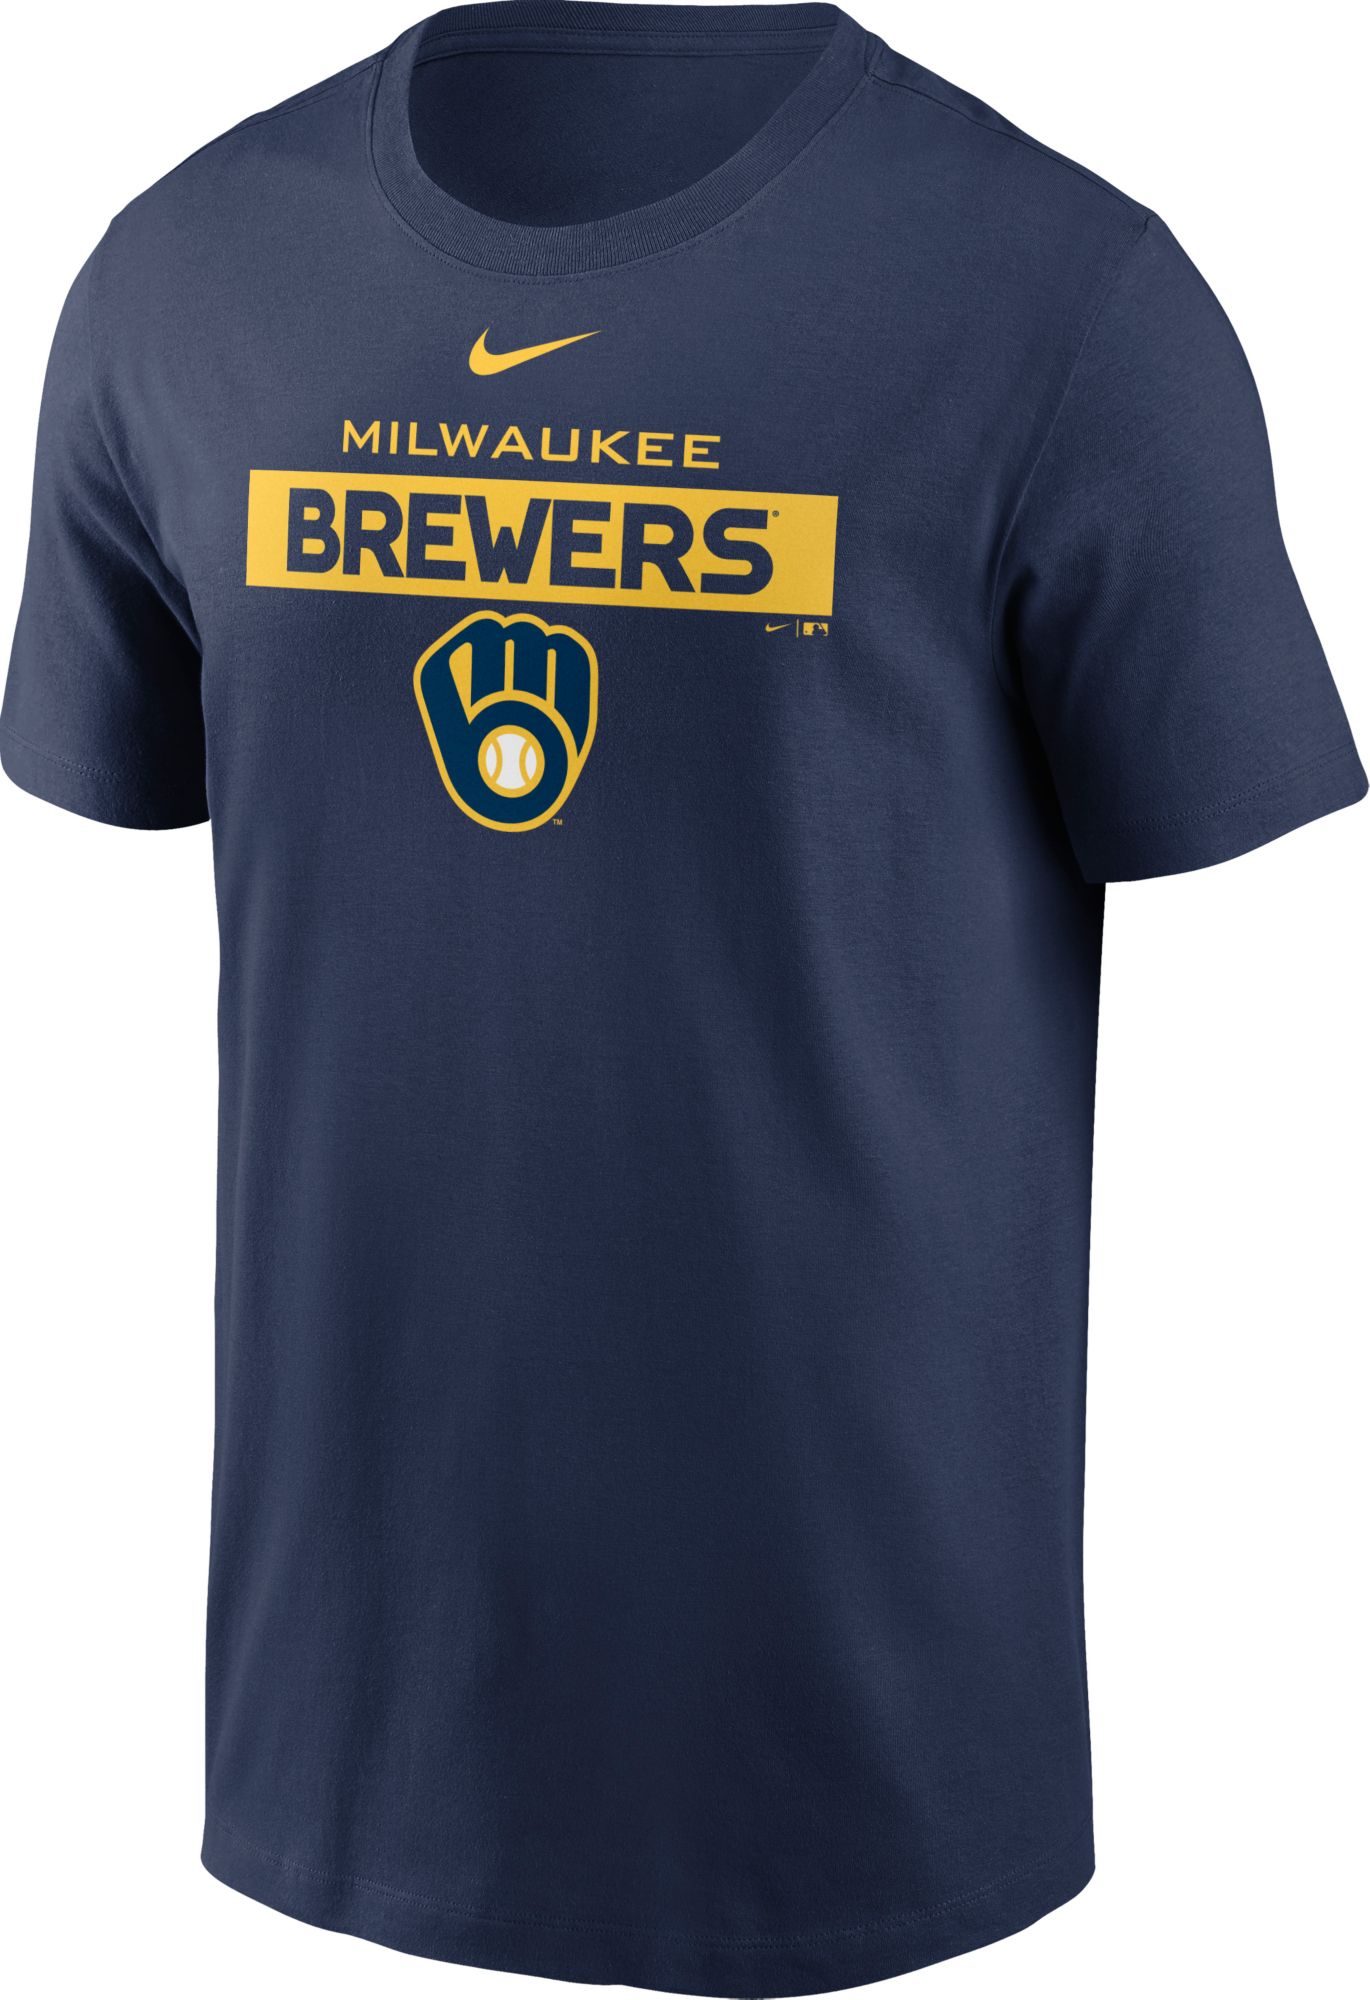 Milwaukee Brewers Cooperstown Double Switch Men's Oversized T-Shirt